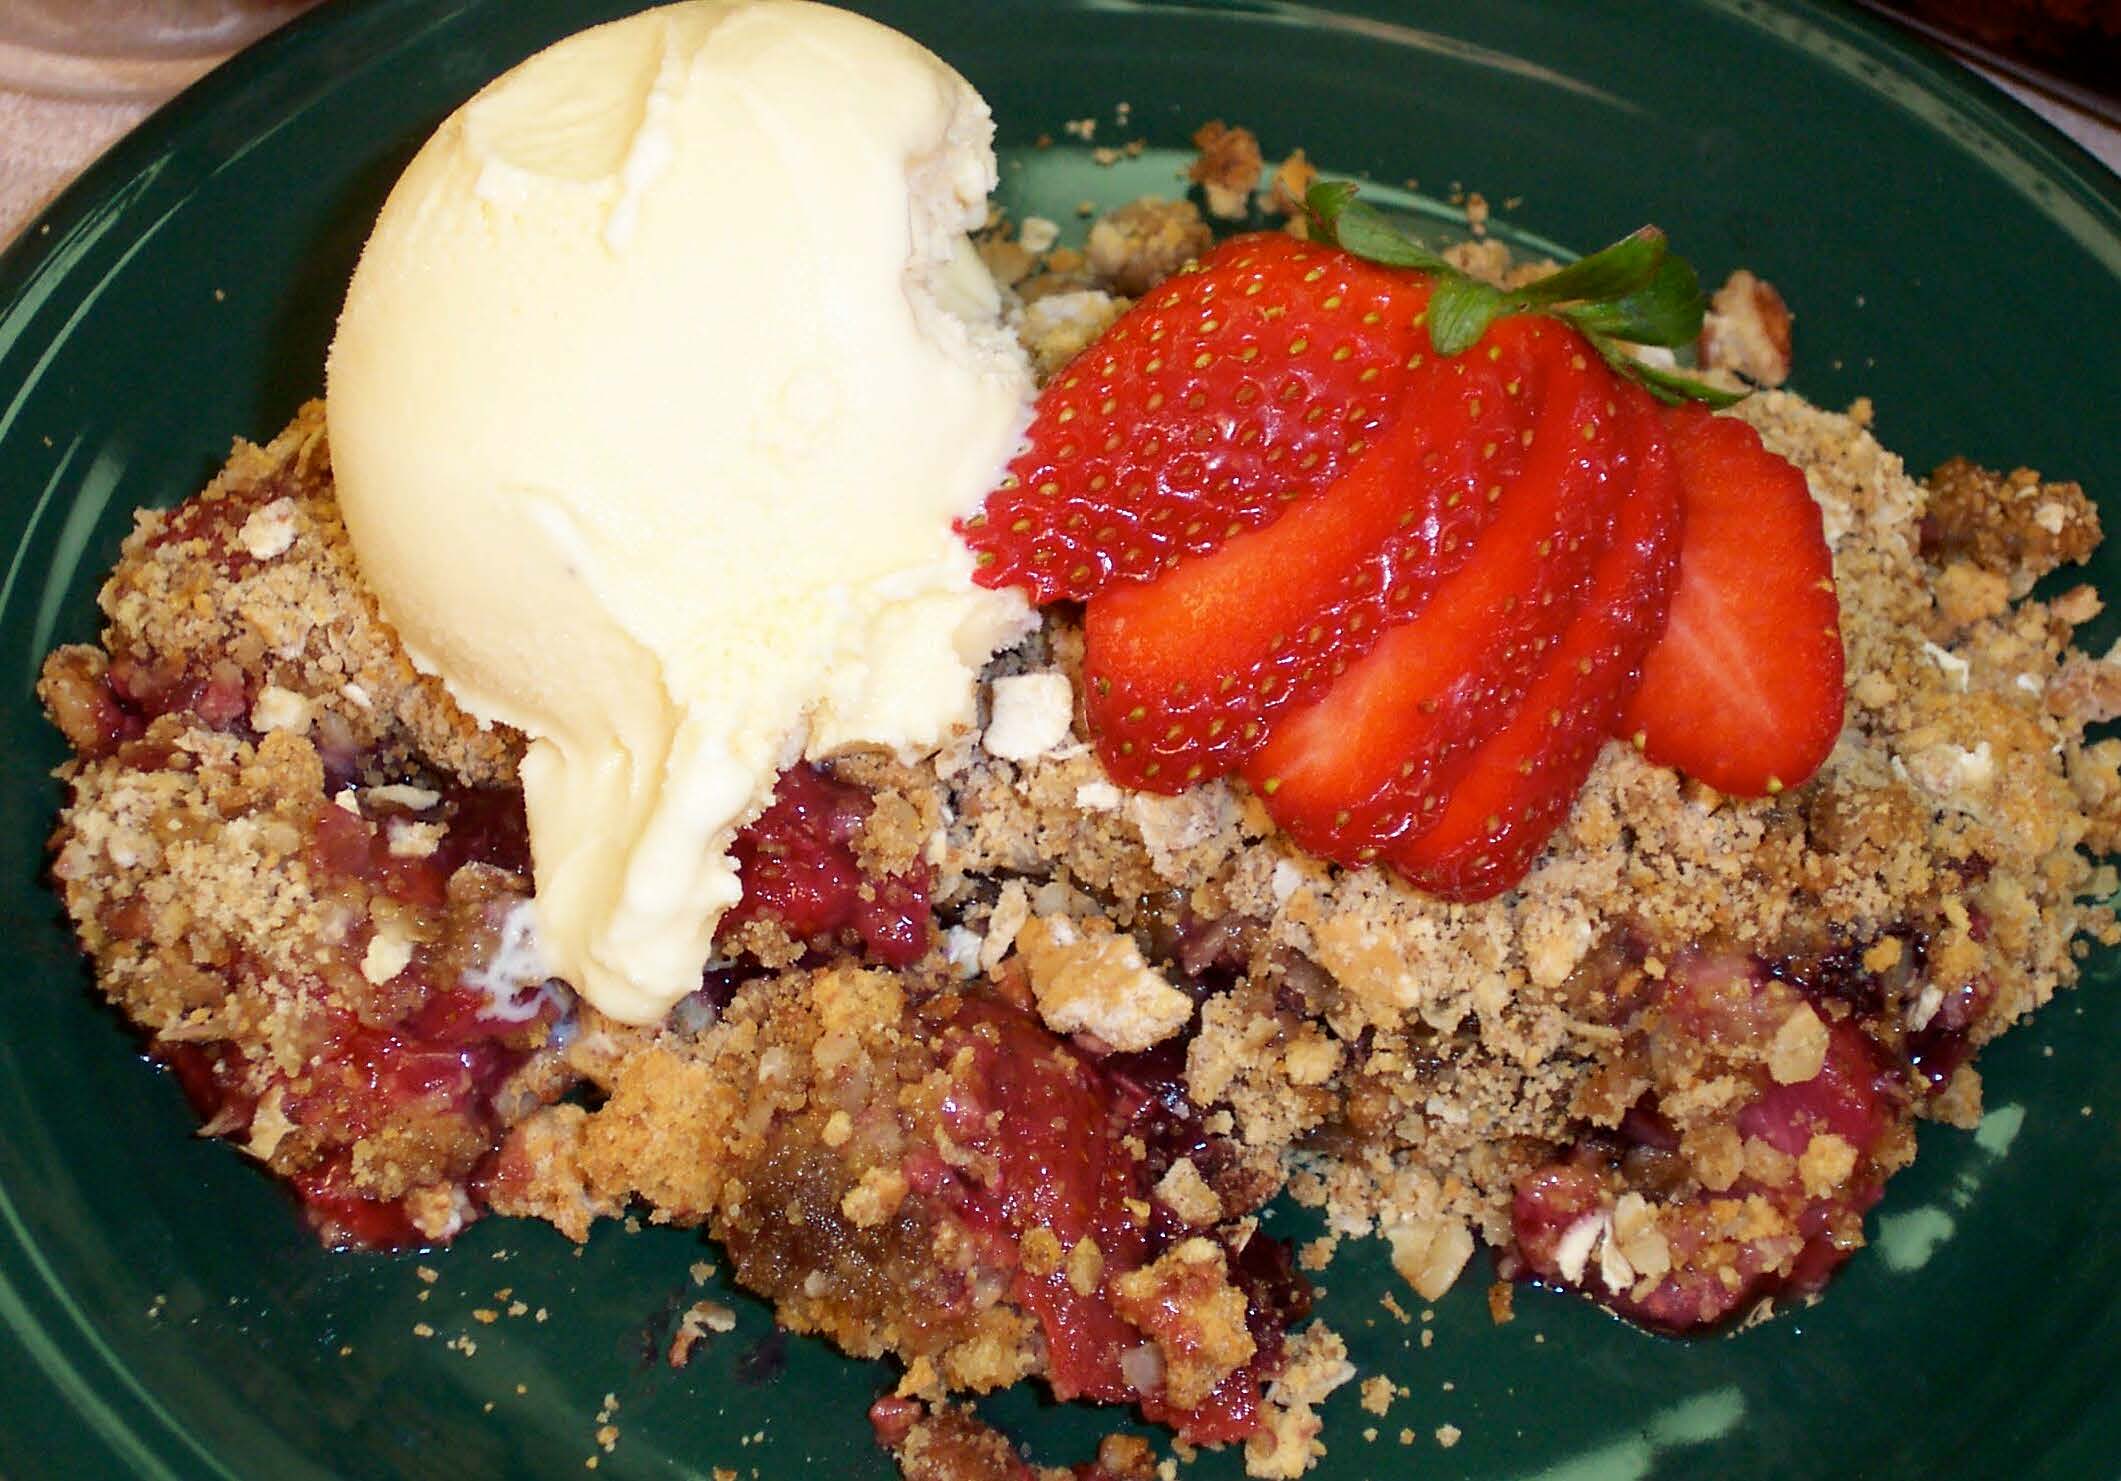 Berry crisp with ice cream on a green plate.